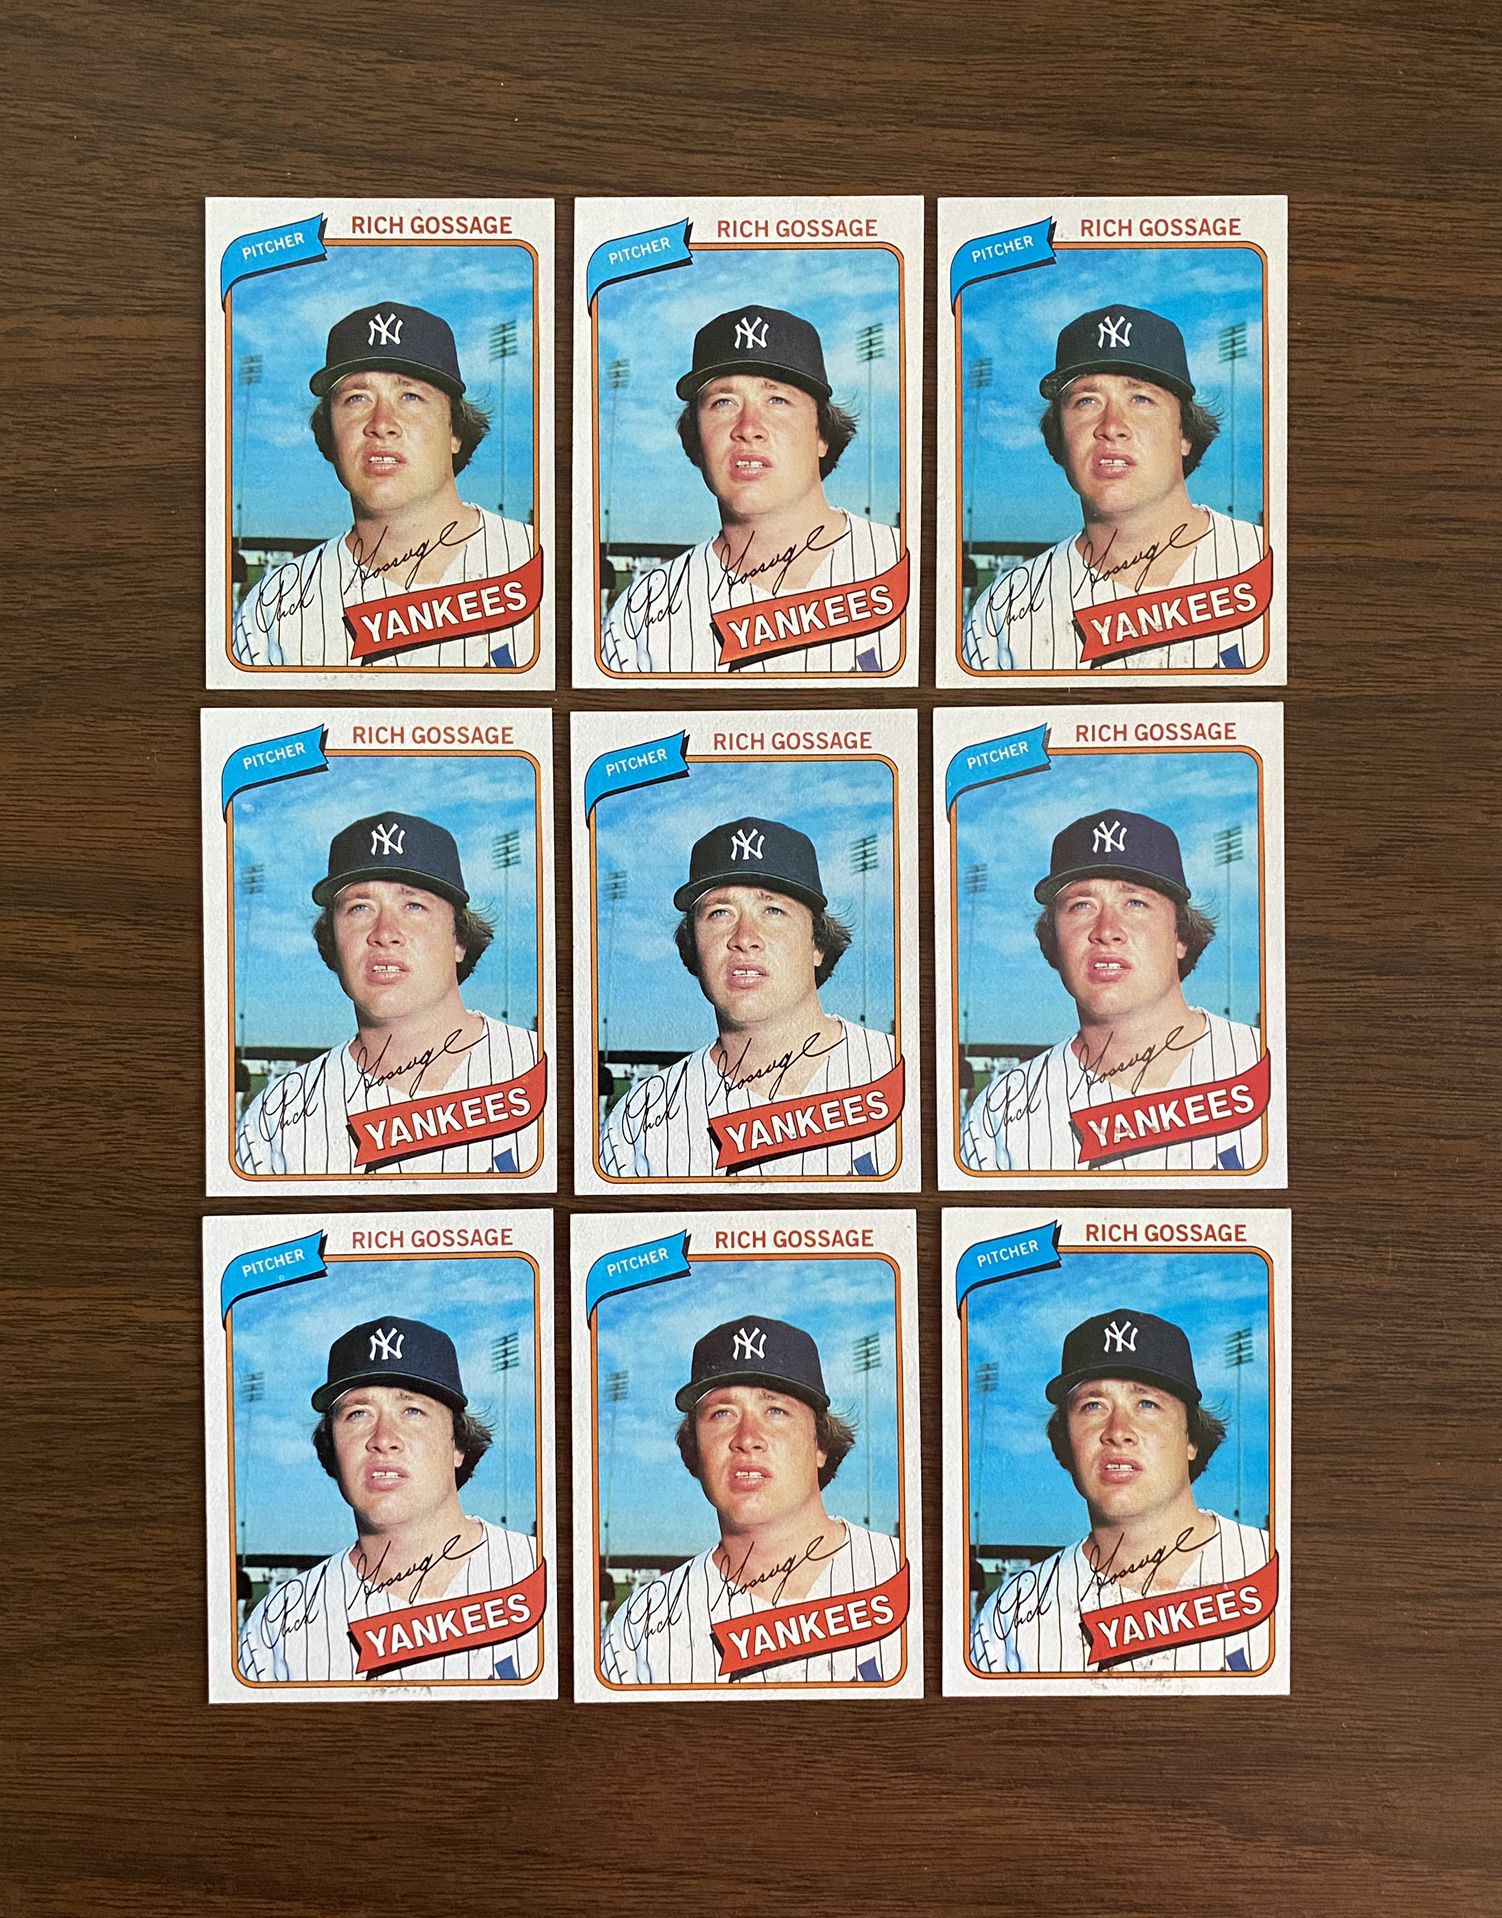 LOT OF 9 RICH “GOOSE” GOSSAGE 1980 TOPPS BASEBALL CARDS # 140 NEW YORK YANKEES